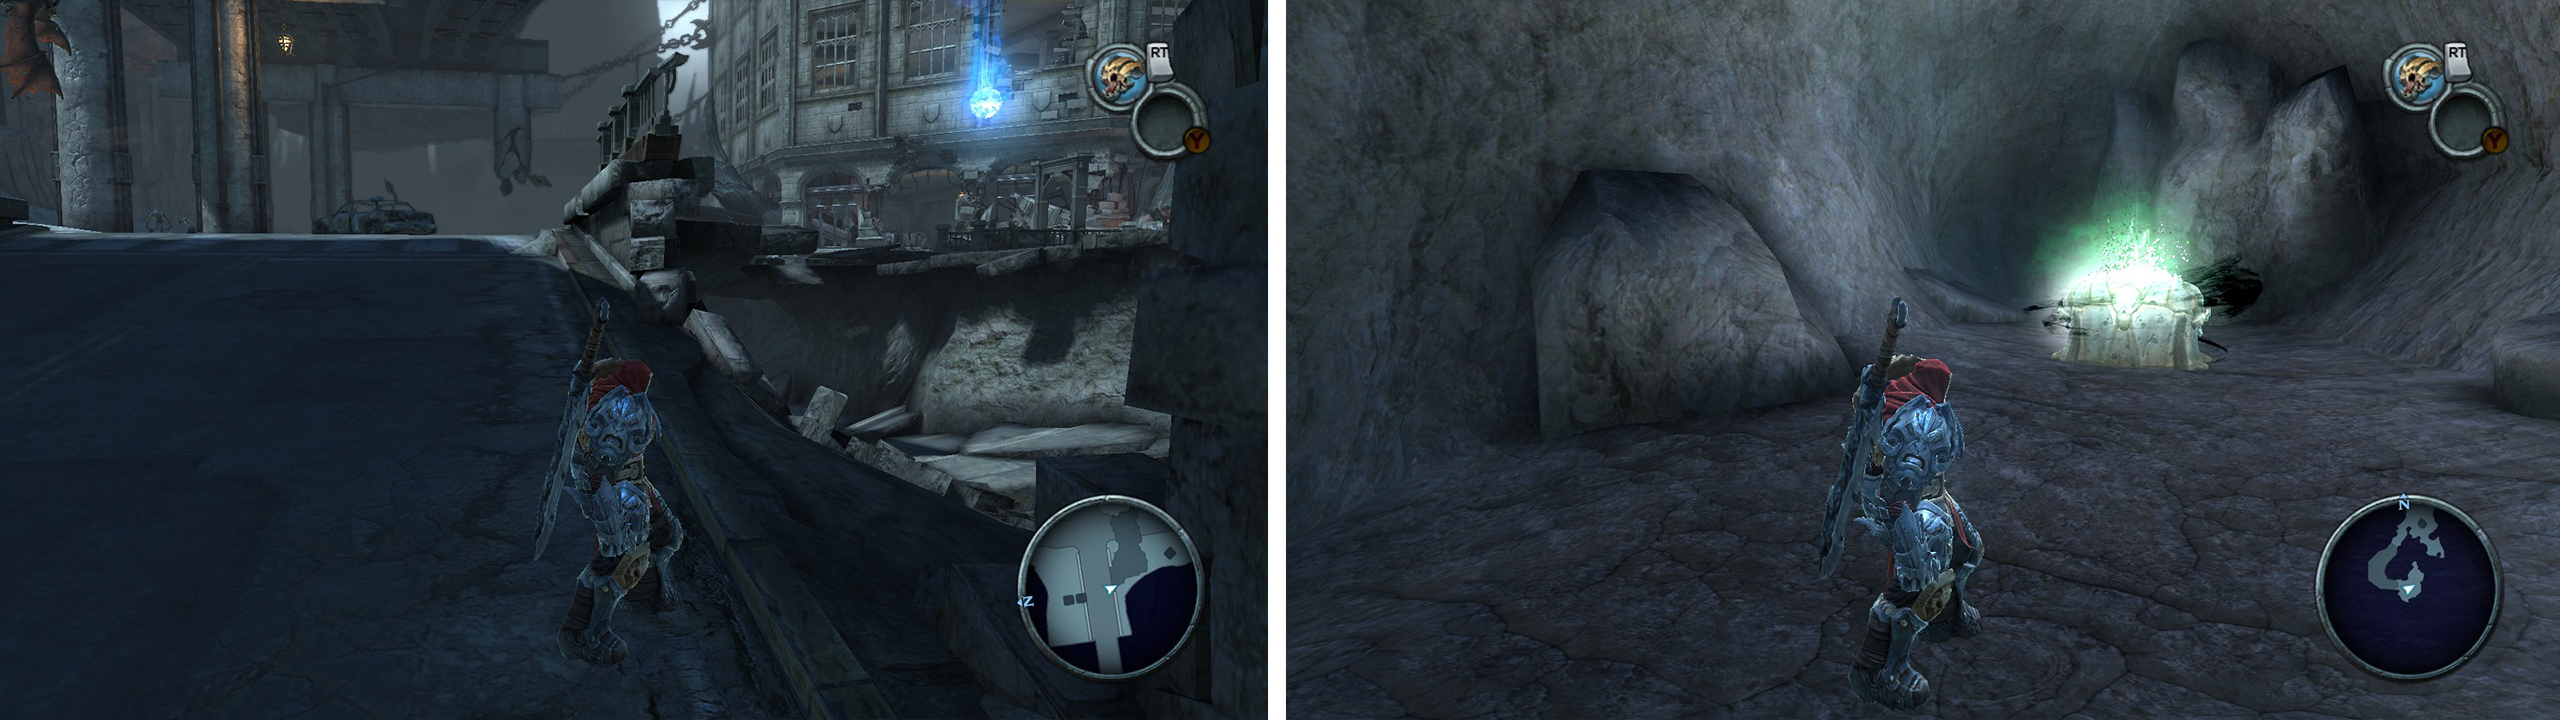 Upon entering the Broken Stair go through the destroyed wall (left) to find an Artefact. The water in Vulgrims location has a tunnel leading to a Life Stone Shard (right).